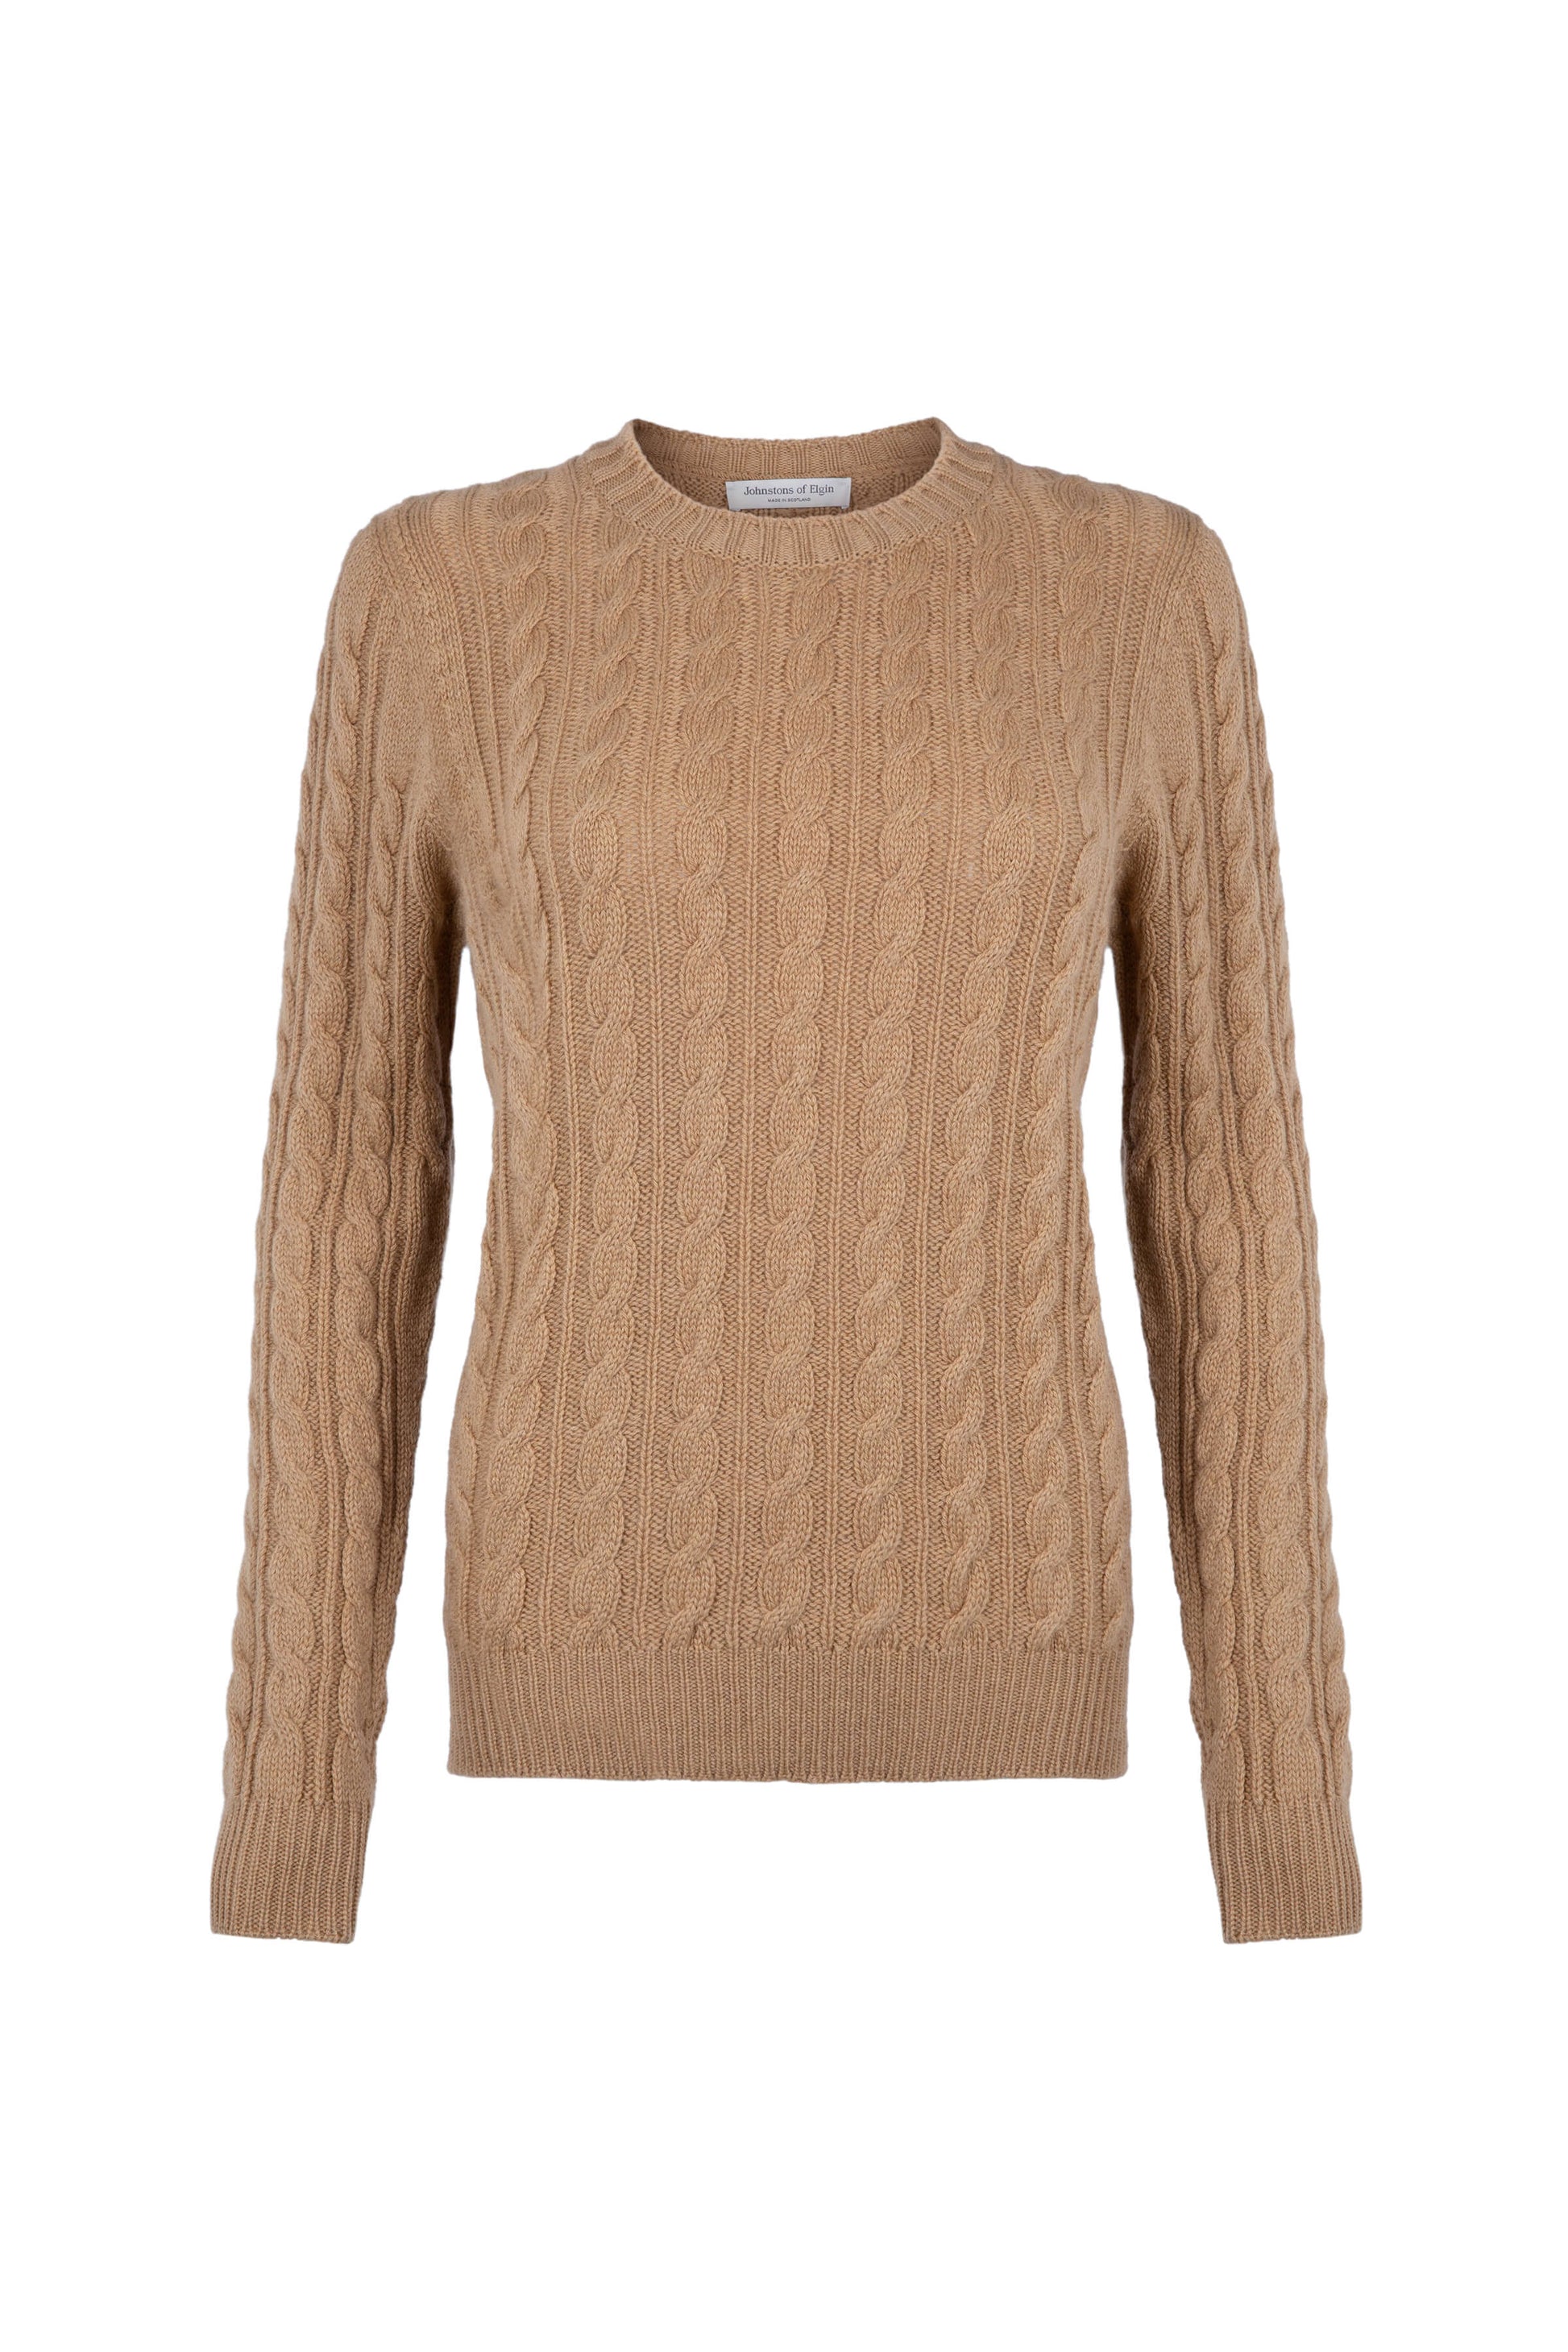 Johnstons of Elgin Womens Knitwear Camel Cable Cashmere Jumper KAI05085HB4315